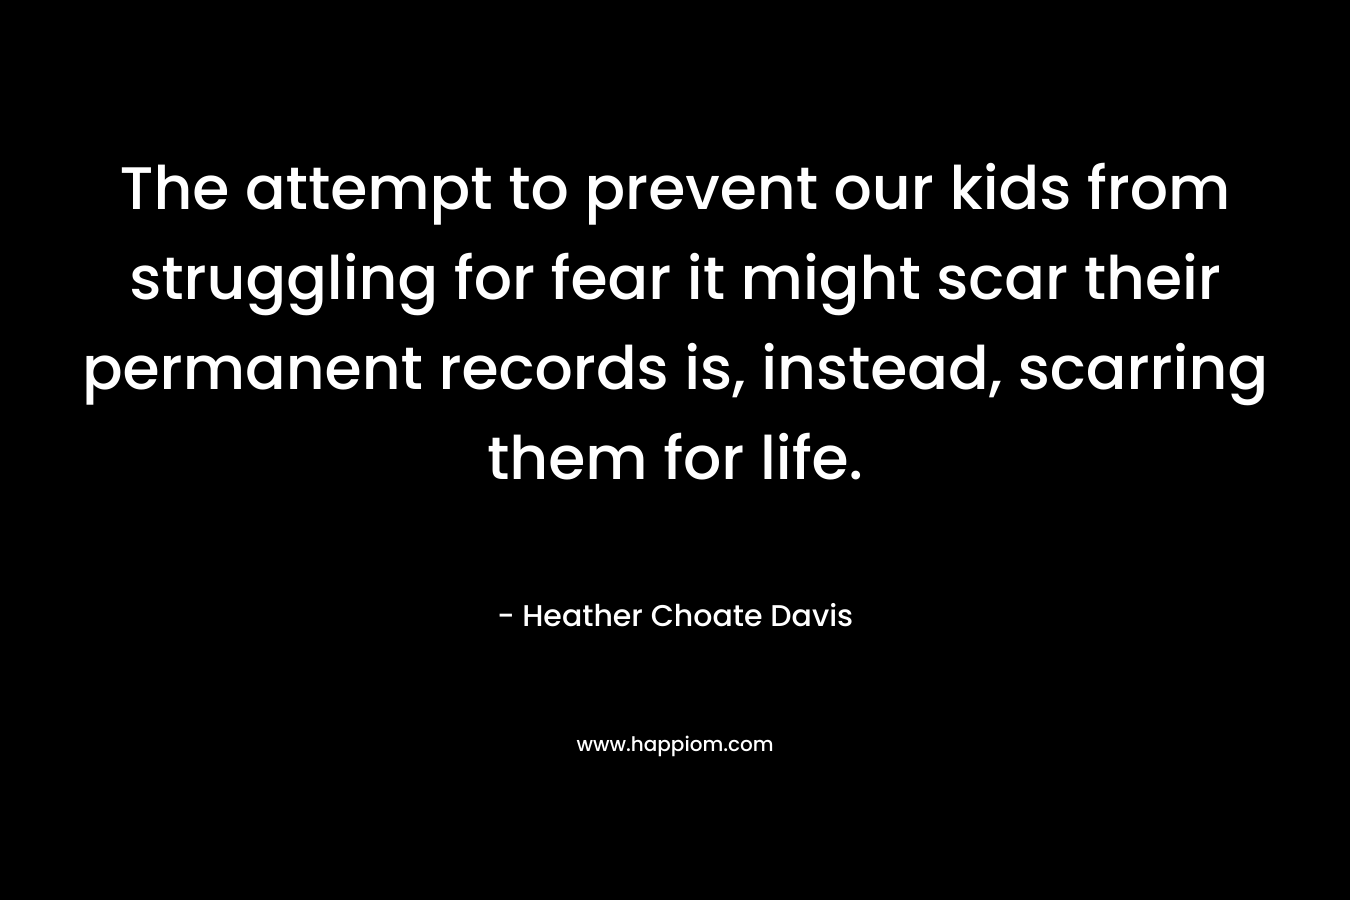 The attempt to prevent our kids from struggling for fear it might scar their permanent records is, instead, scarring them for life. – Heather Choate Davis